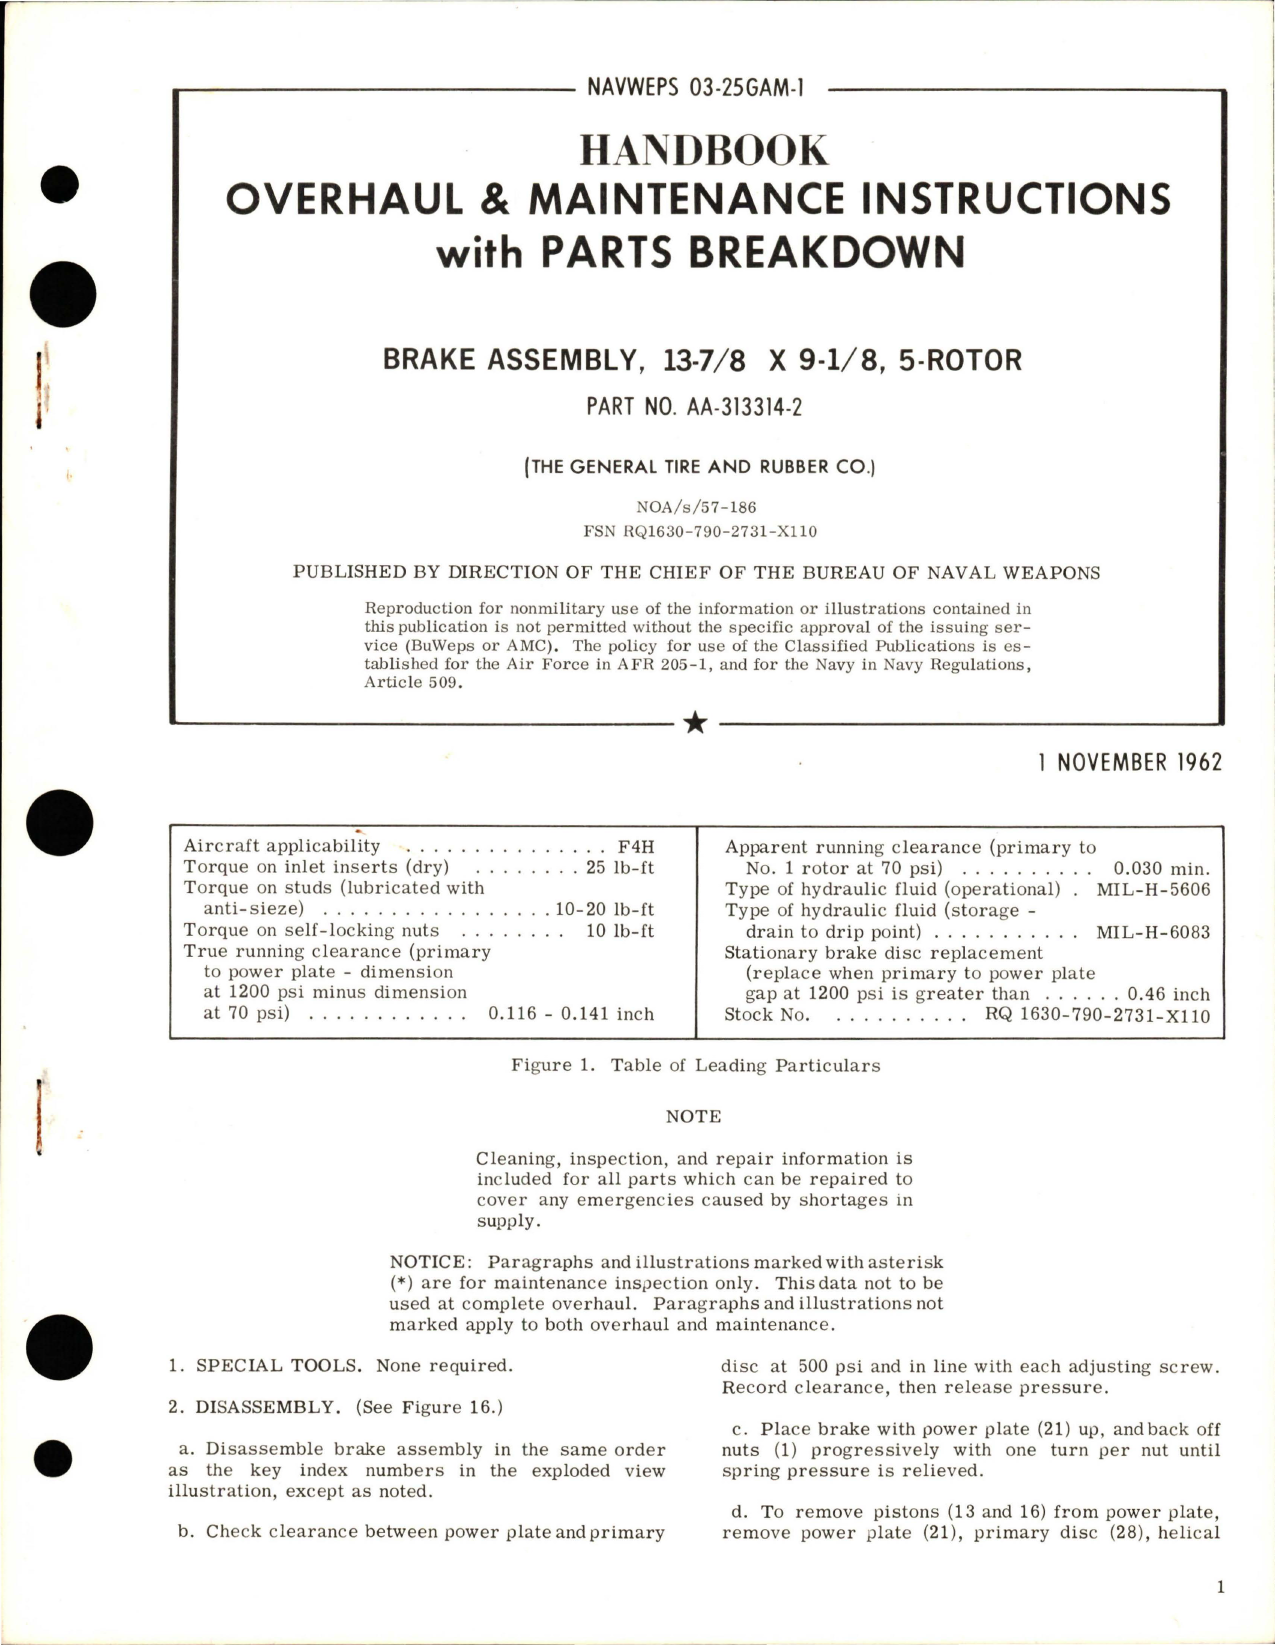 Sample page 1 from AirCorps Library document: Overhaul and Maintenance Instructions with Parts Breakdown for 5-Rotor Brake Assembly - 13 7/8 x 9 1/8 - Part AA-313314-2